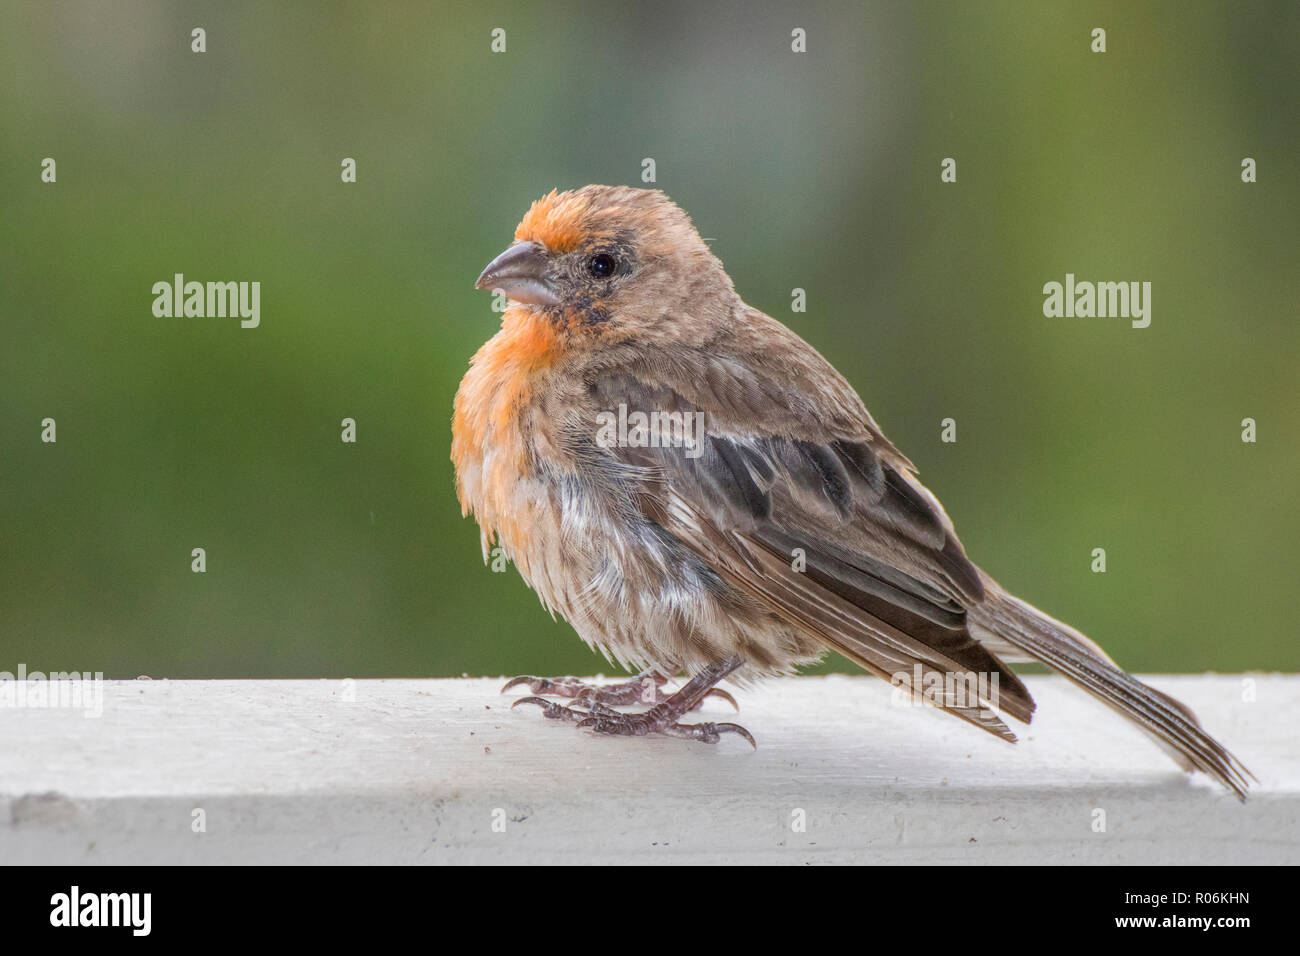 Close up Profile House Finch Bird with Orange Chest and Head Feathers Stock Photo